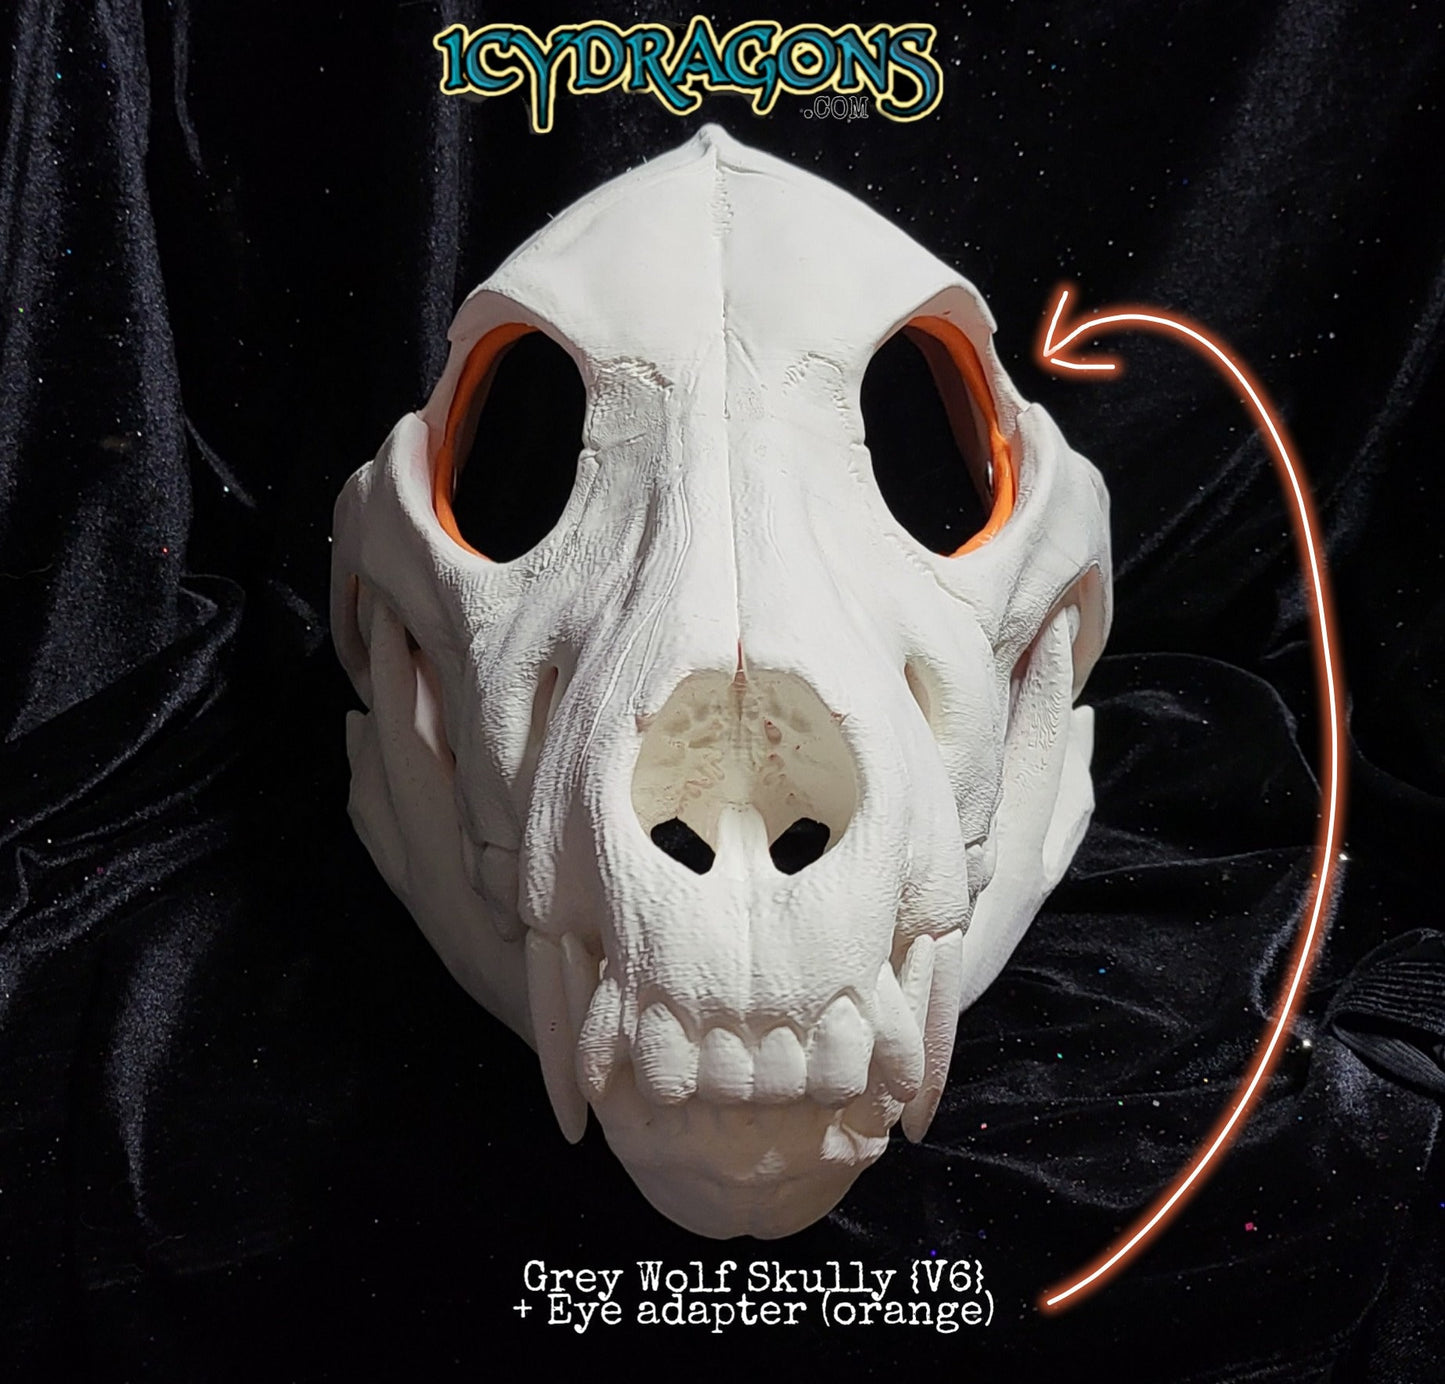 IcyDragons Grey Wolf Skully Detailed Canine Wearable Head 3D Printed Advanced Skull Cosplay & Fursuit Werewolf Animal or Decoration